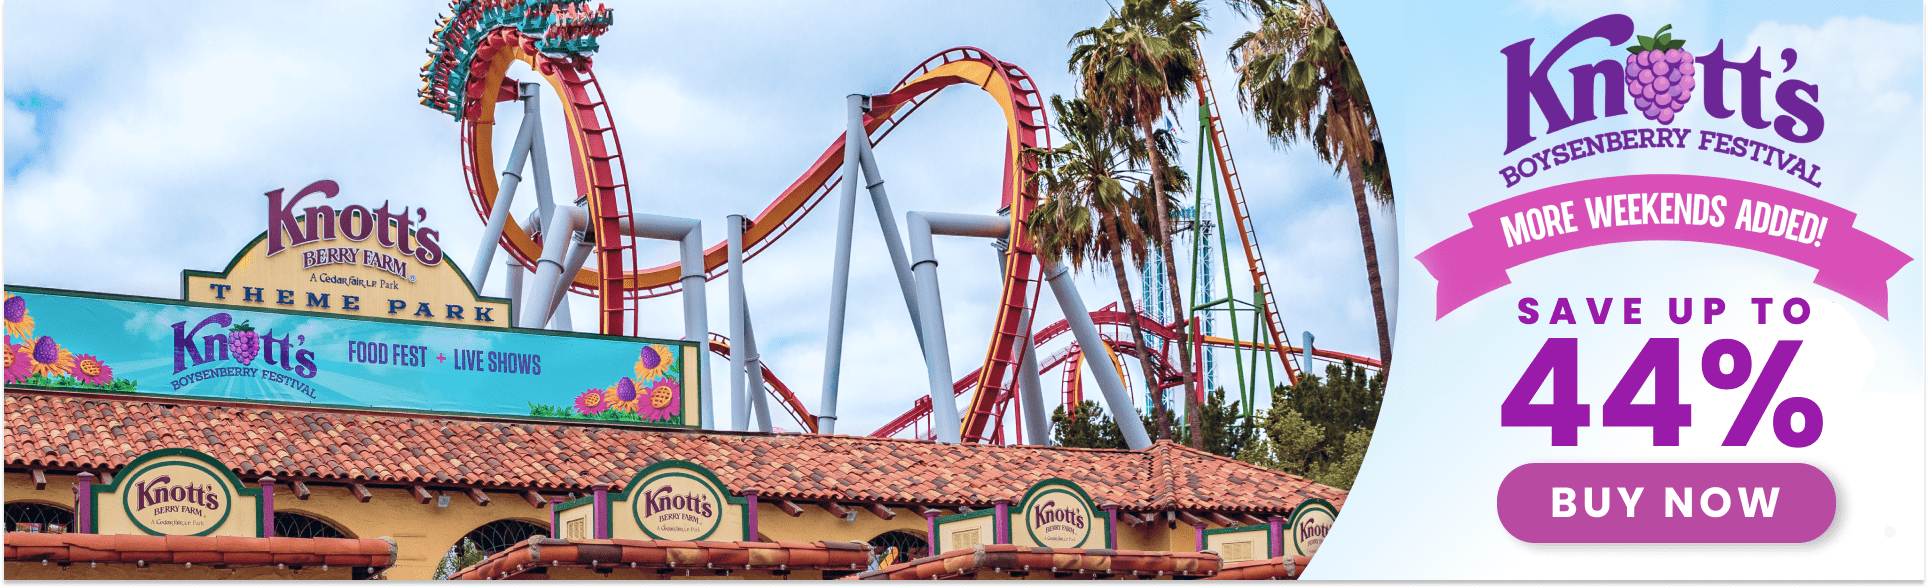 Knotts Berry Farm Discounted Tickets